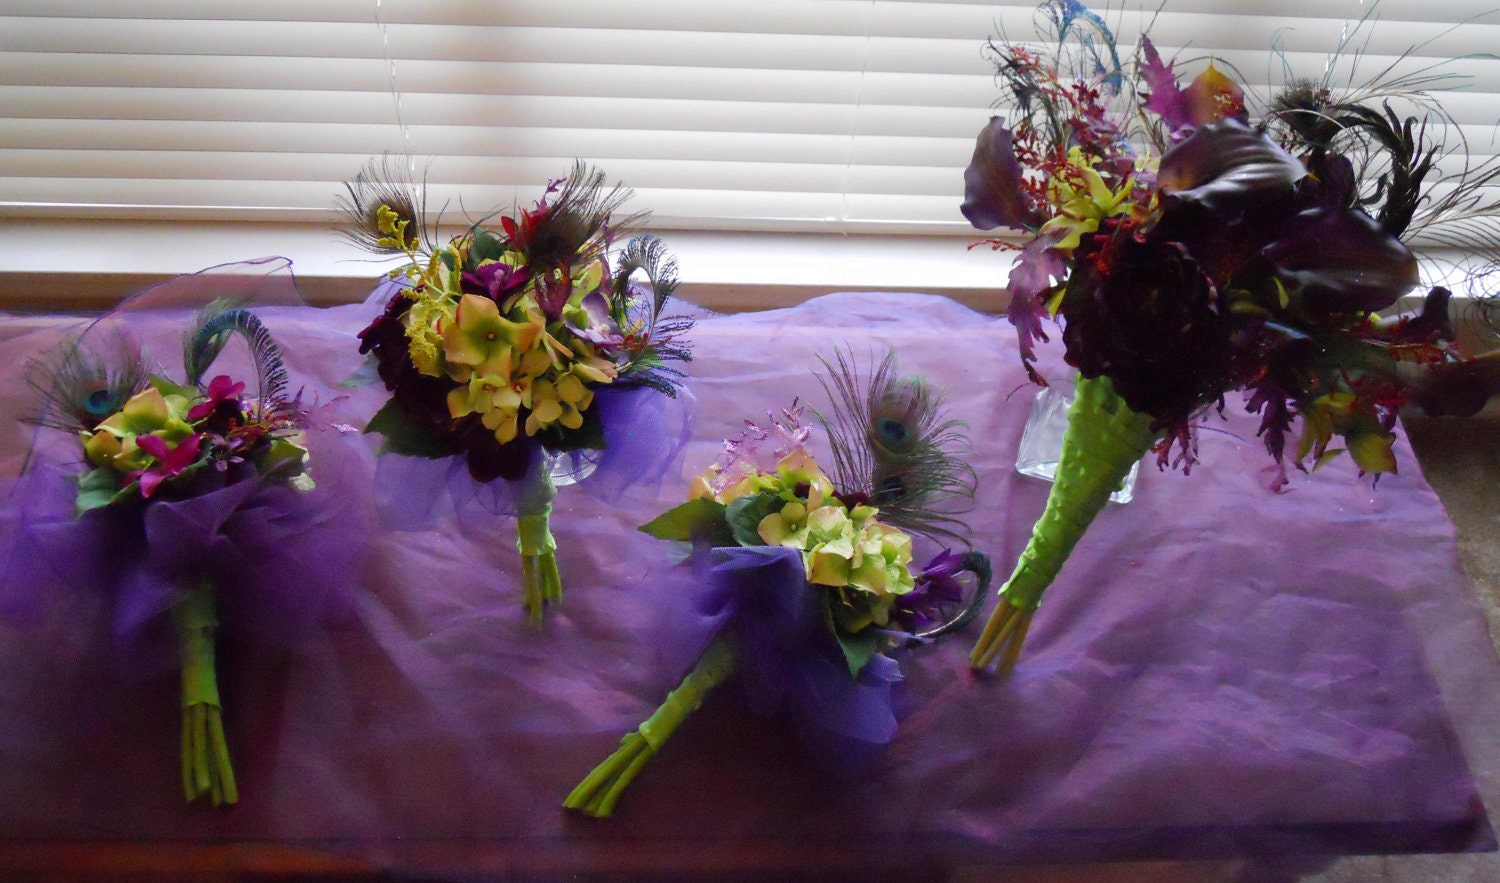 Purple Peacock Themed Wedding Bouquet From mayblue83